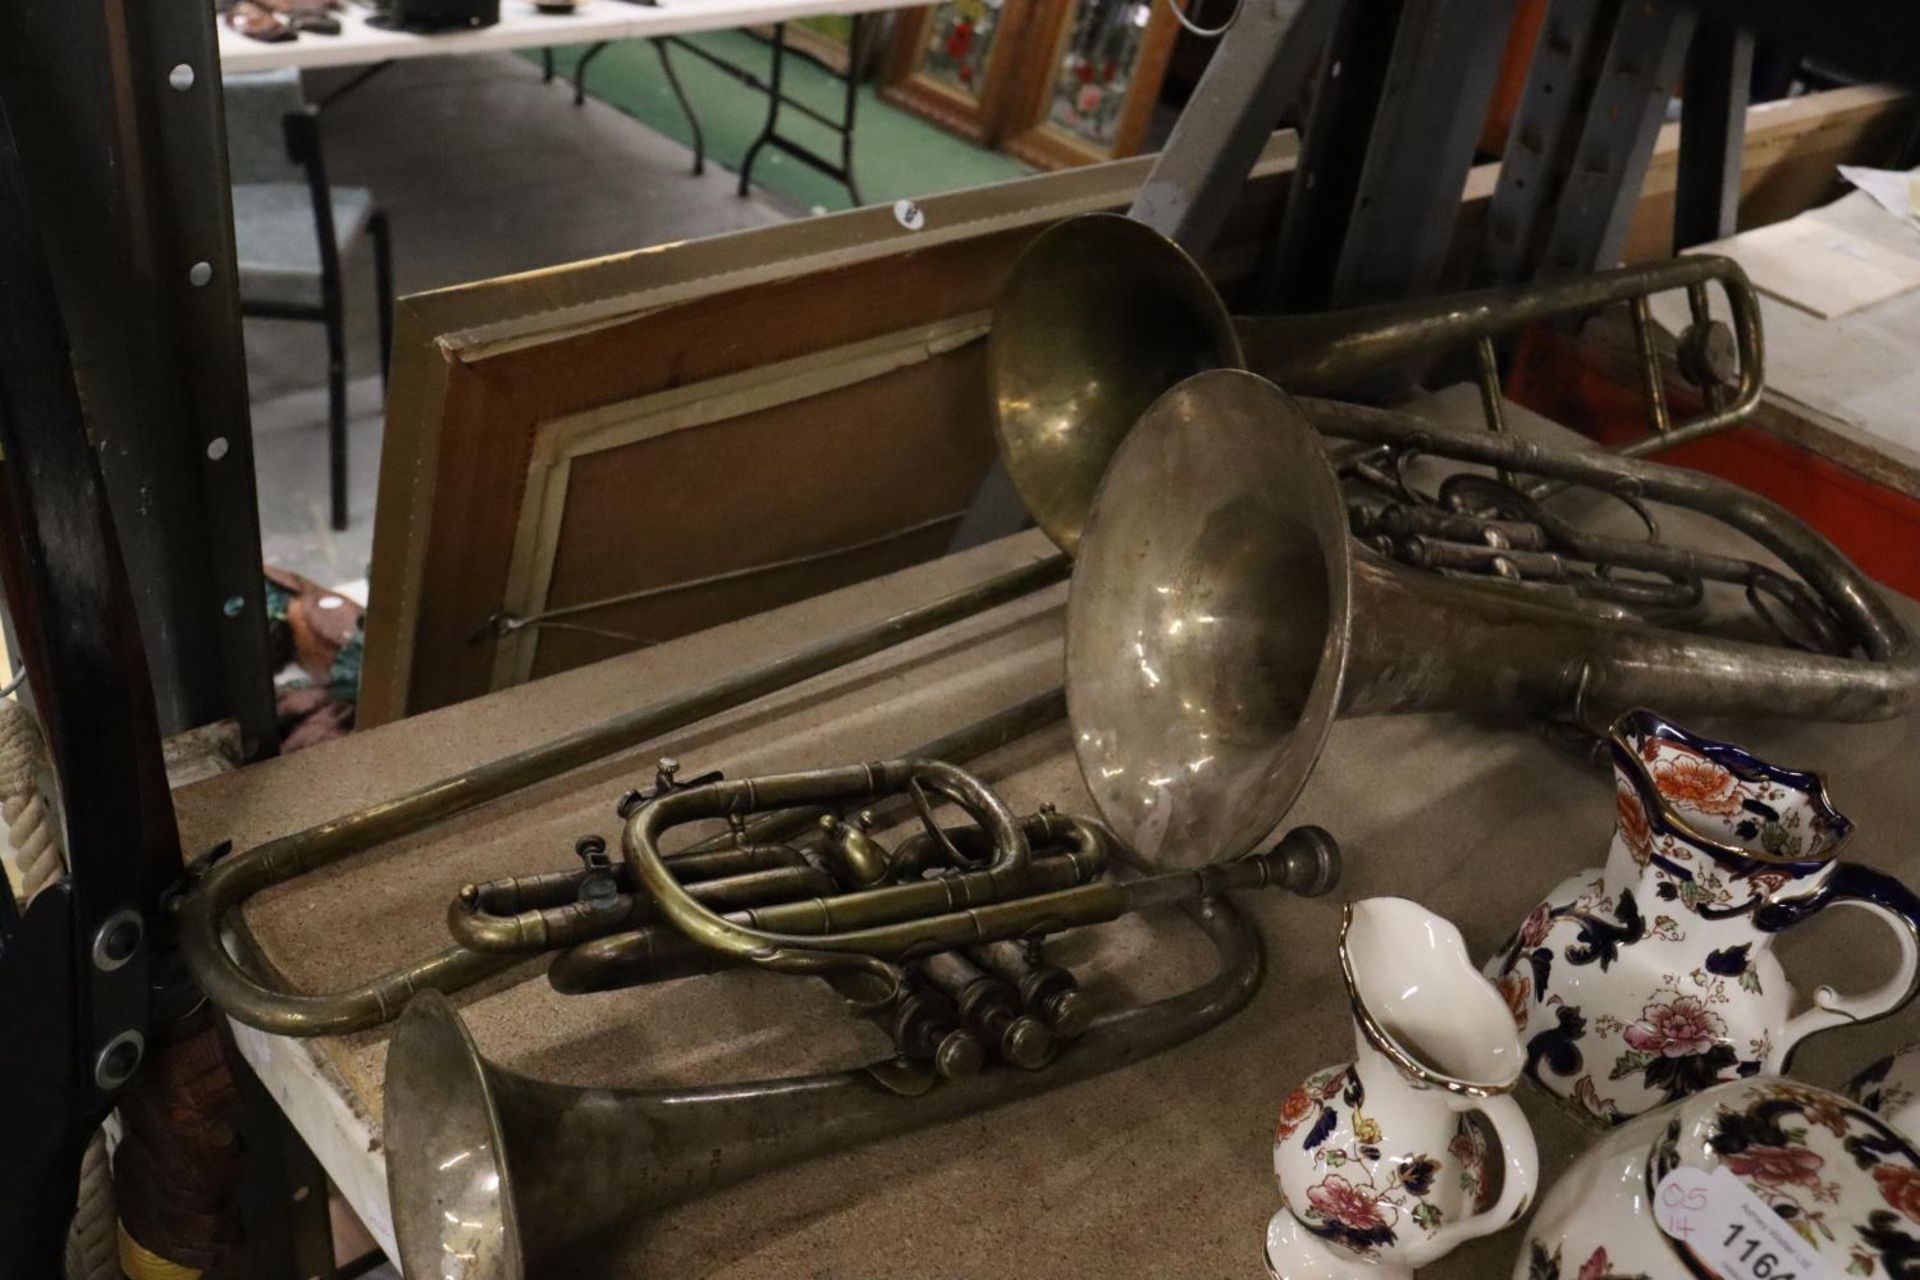 THREE VINTAGE MUSICAL INSTRUMENTS TO INCLUDE A CORNET, BARITONE TENOR HORN AND TROMBONE - Image 6 of 6